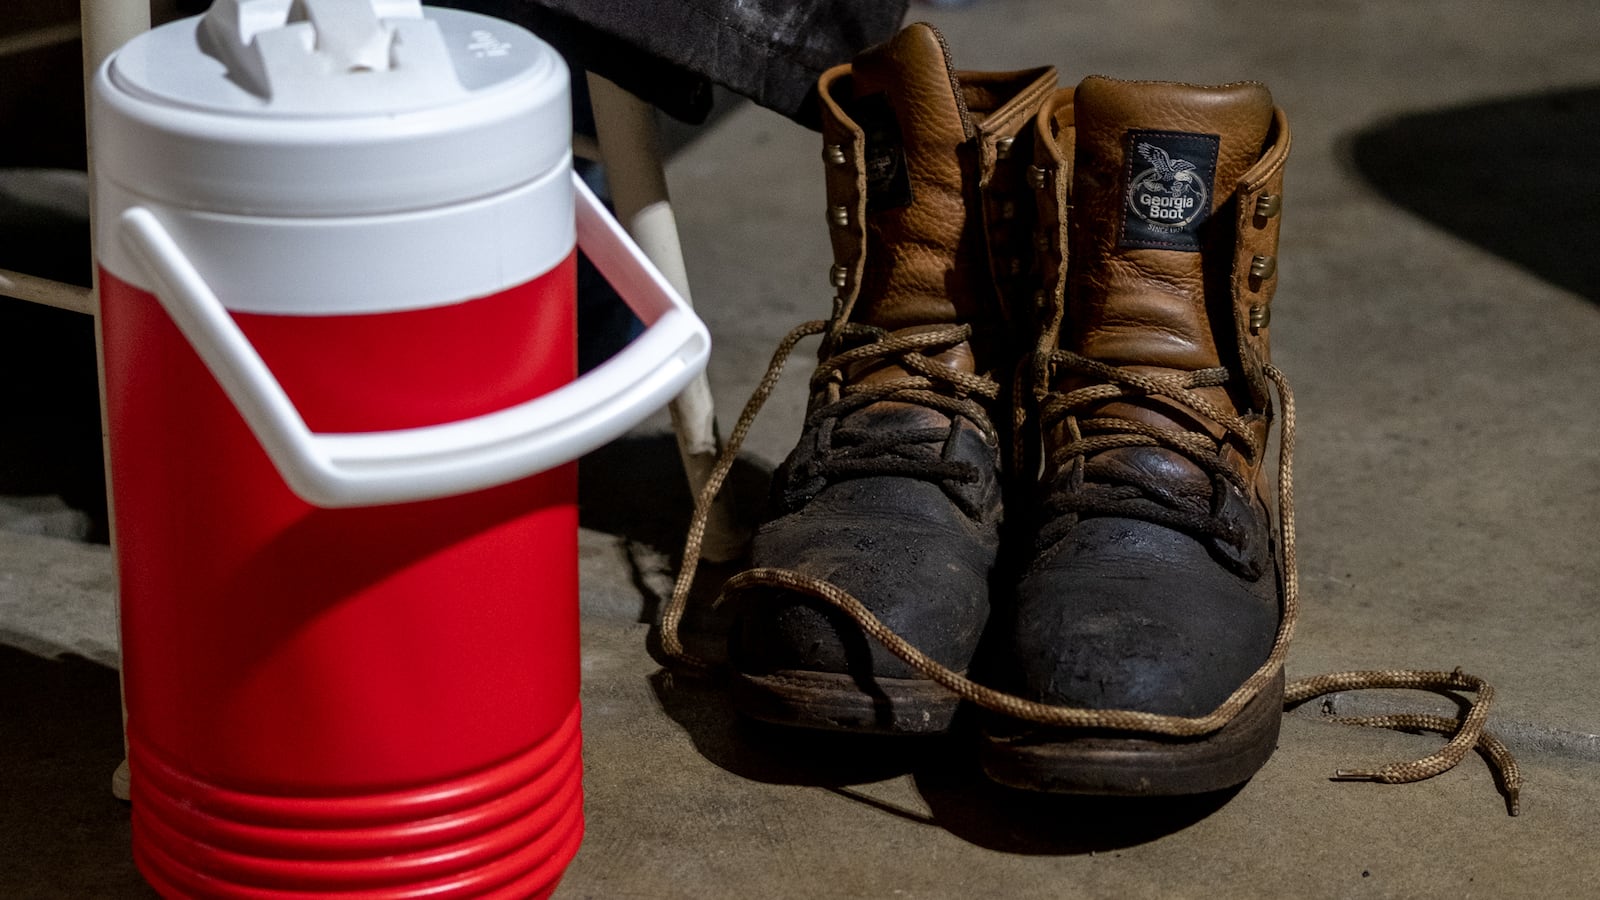 A red and white water jug sits on the floor next to a pair of worn-in work boots.